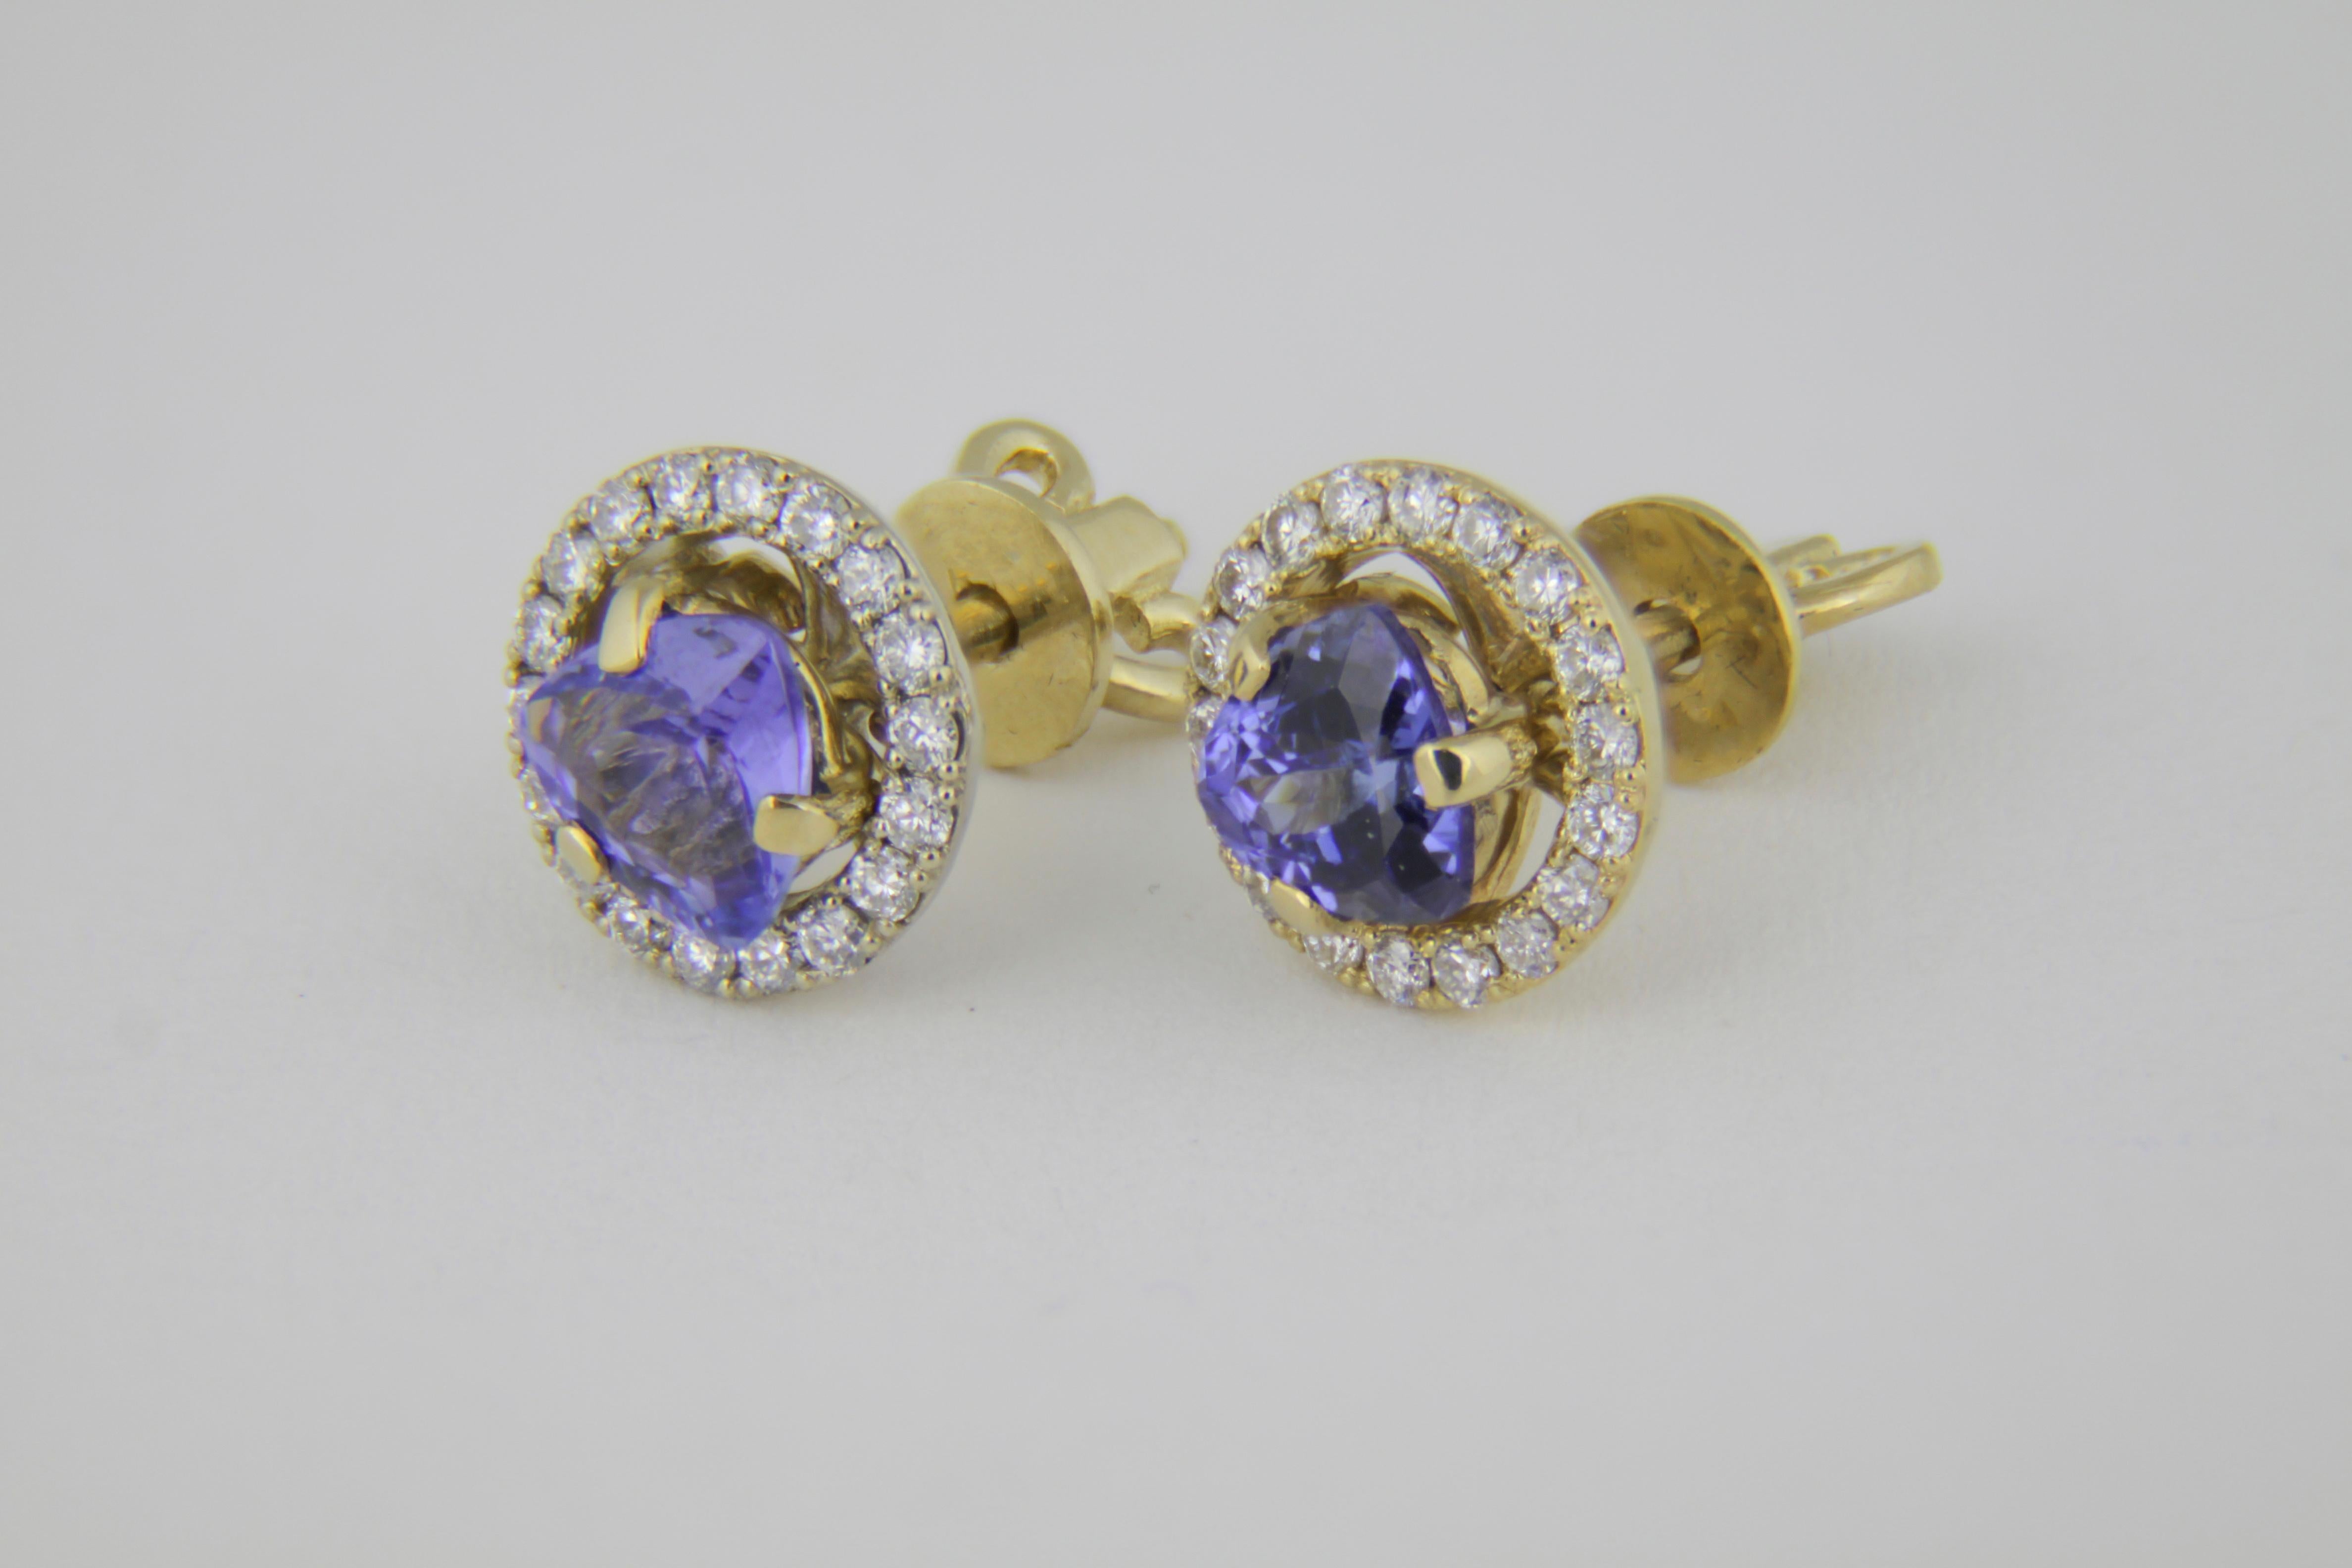 Round Cut Tanzanites 14k Gold Earrings Studs, Removable Jackets Tanzanite Earrings For Sale